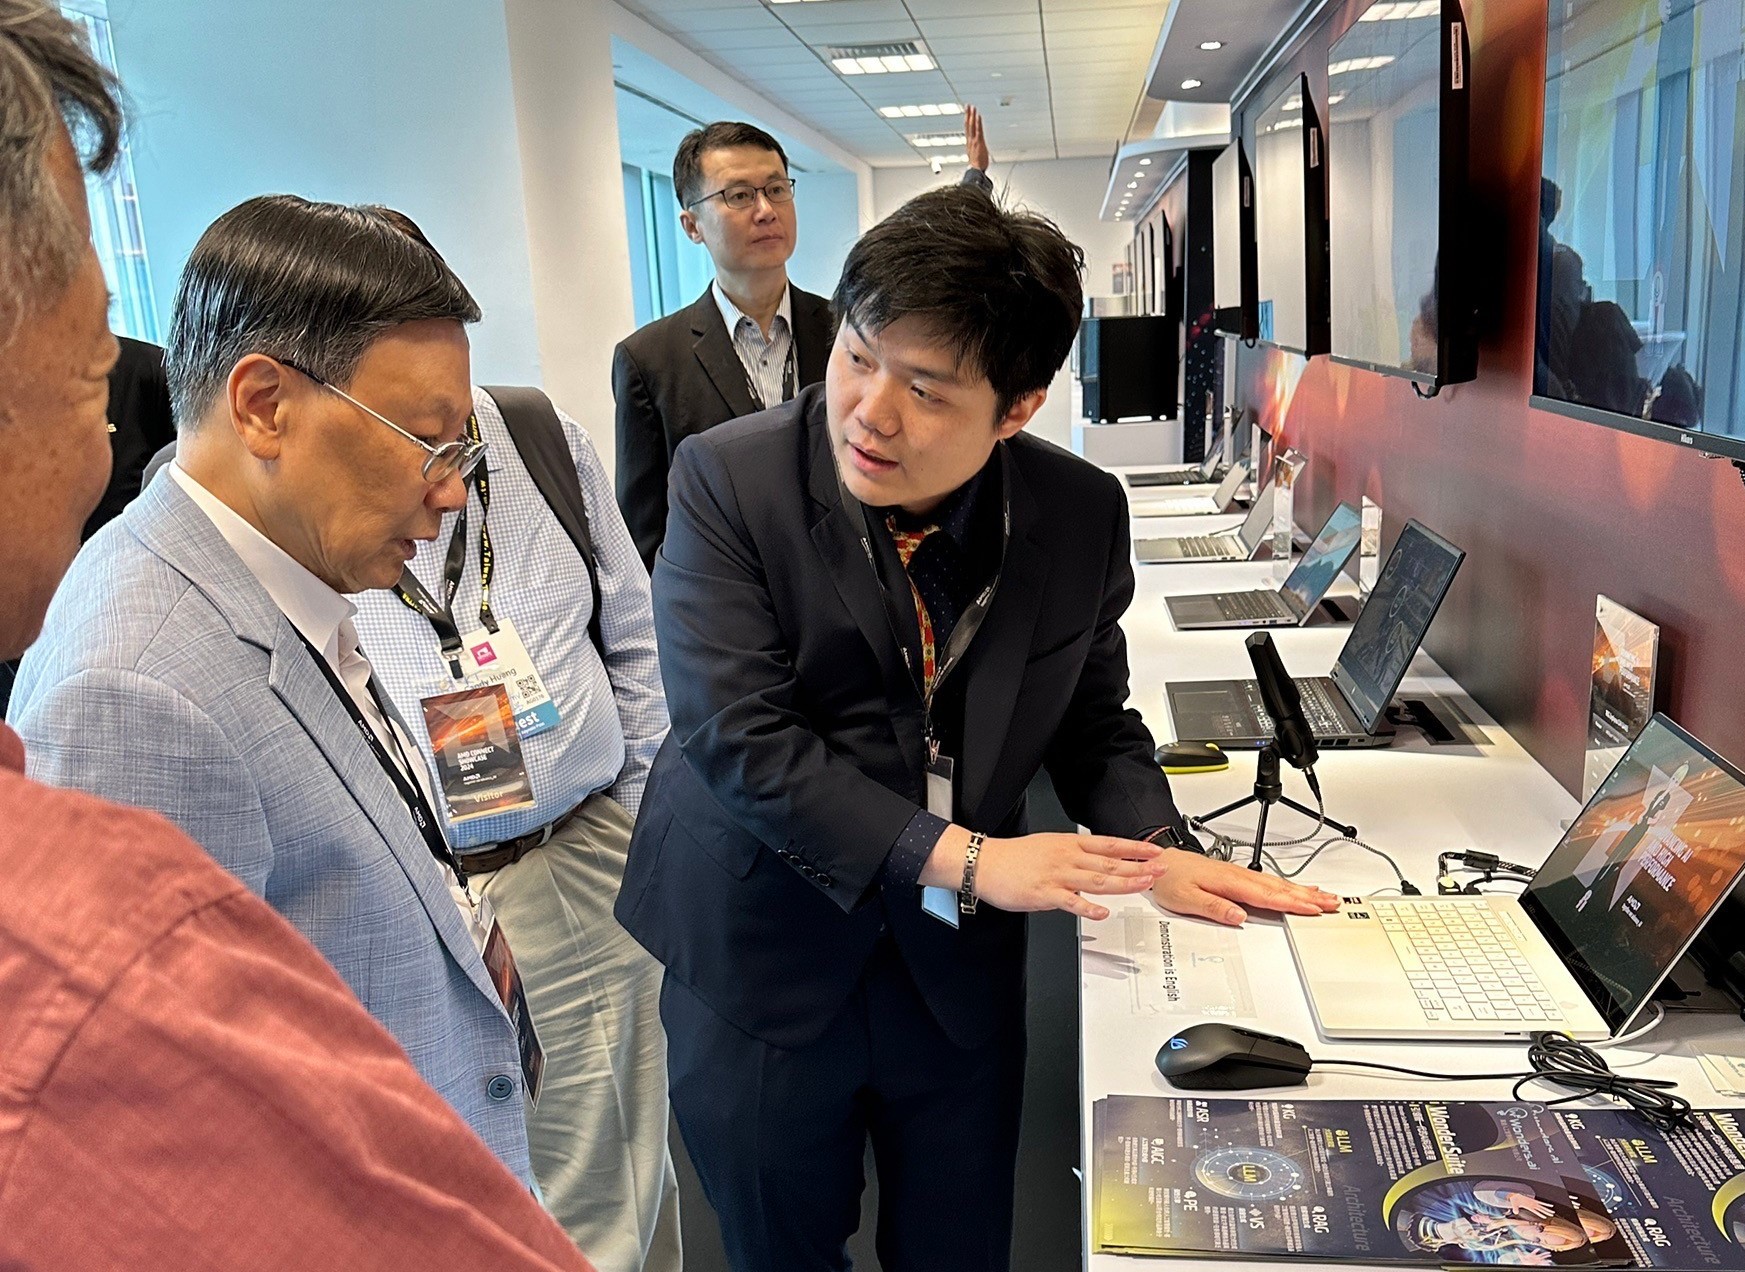 AMD specialists at the Taipei Computer Show exhibition center introduce AMD's three main highlights to President Jeffrey J.P. Tsai of Asia University (left)